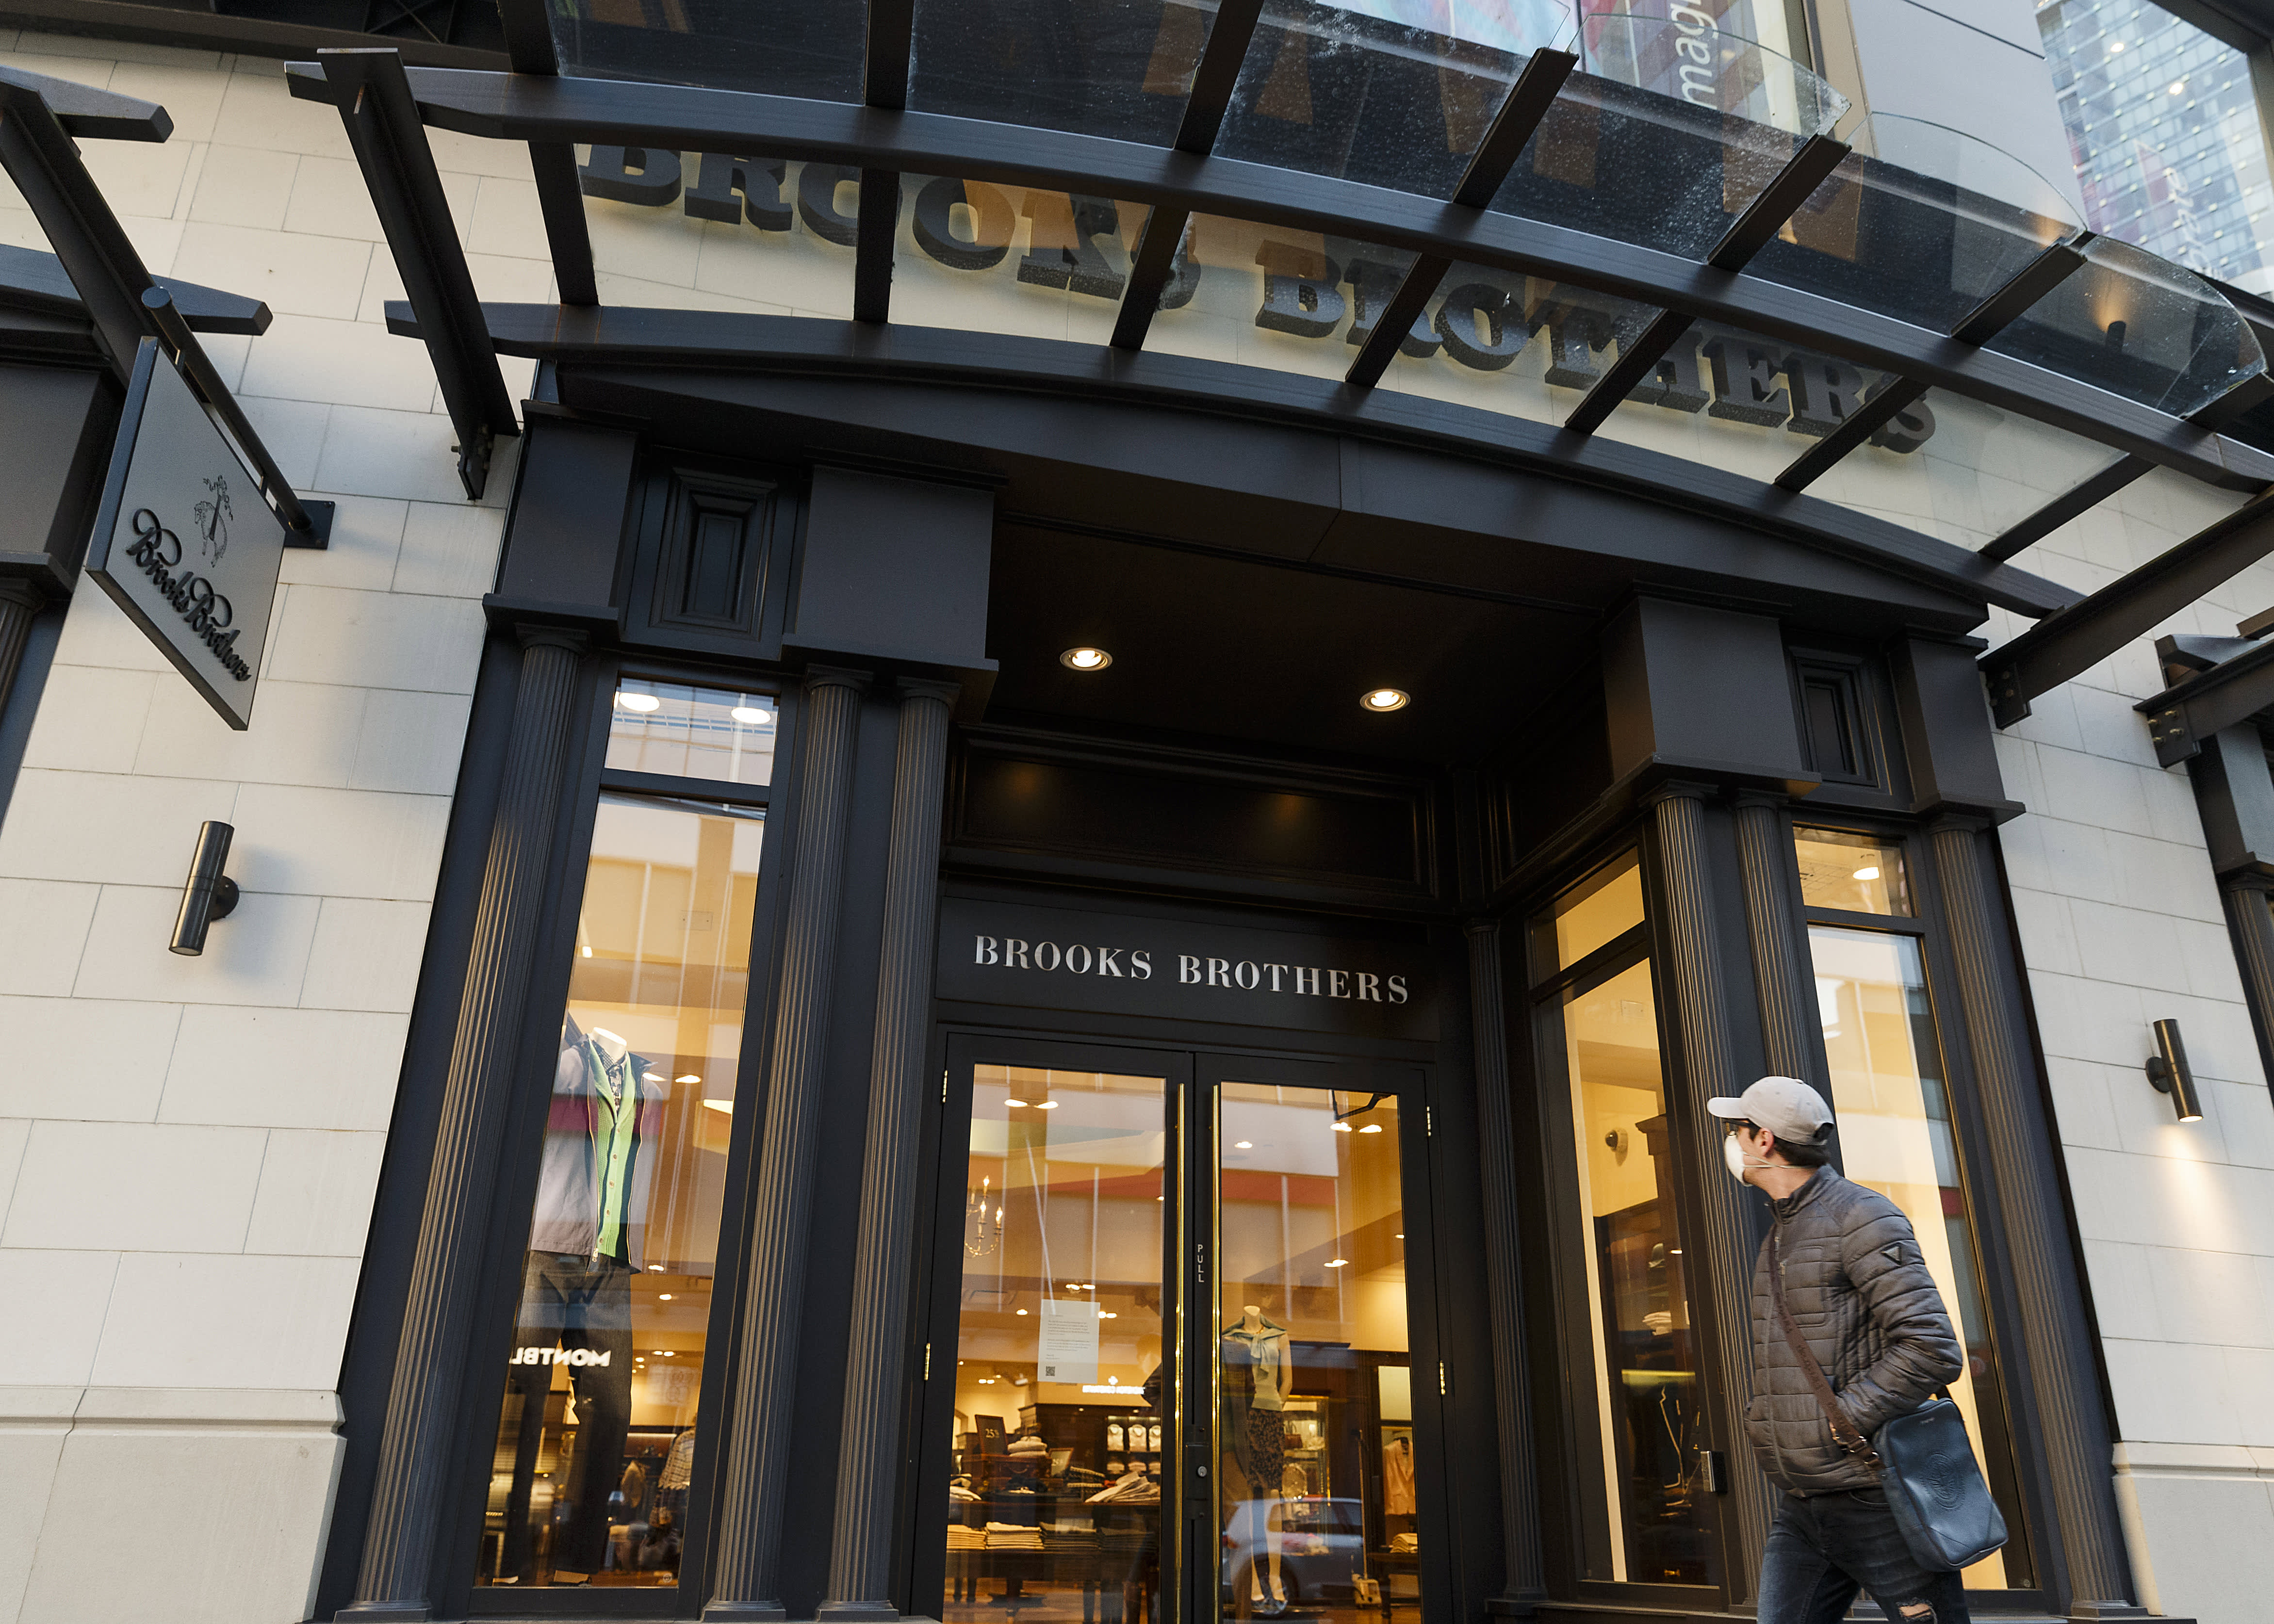 Mall owner Simon and Authentic Brands bid $305 million for Brooks Brothers